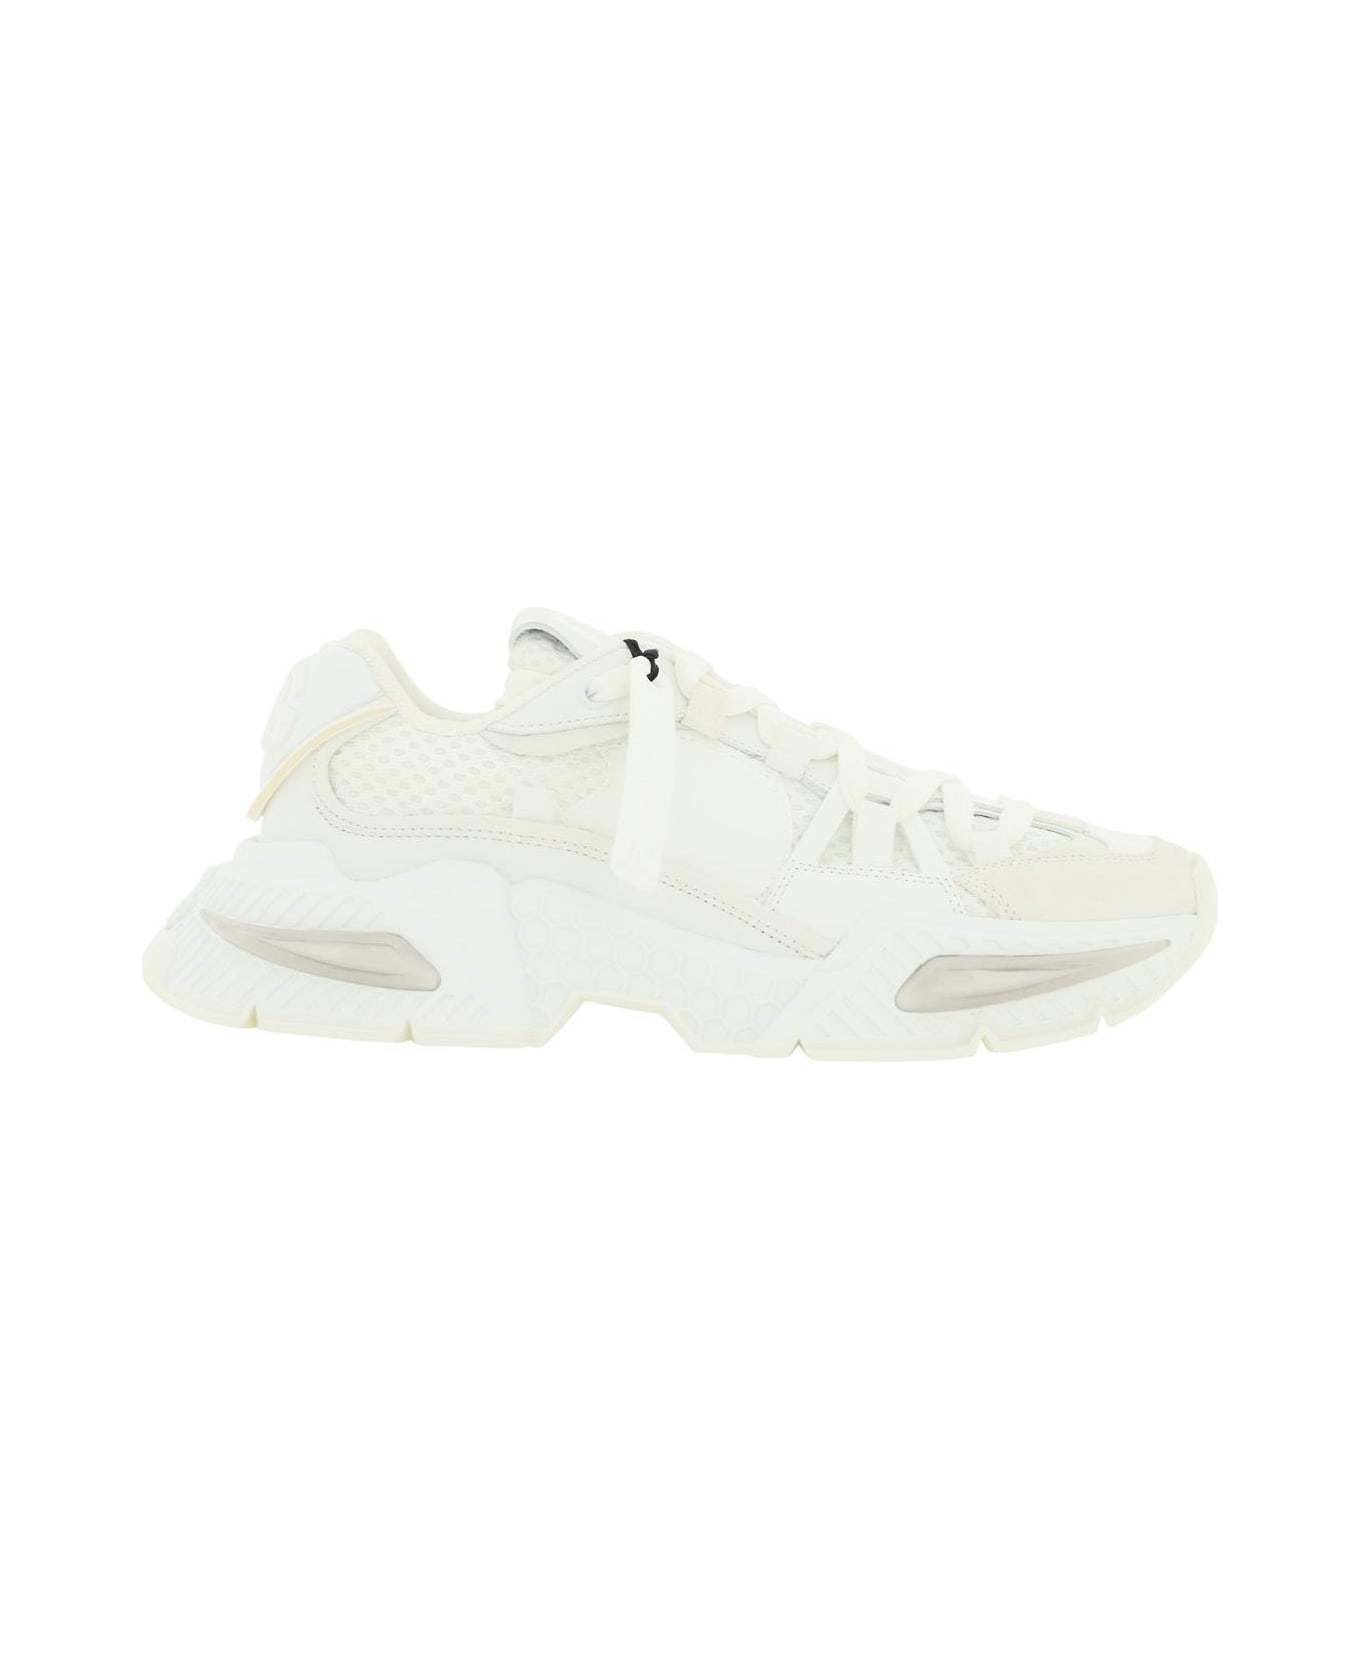 Dolce & Gabbana Airmaster Sneakers - WHITE